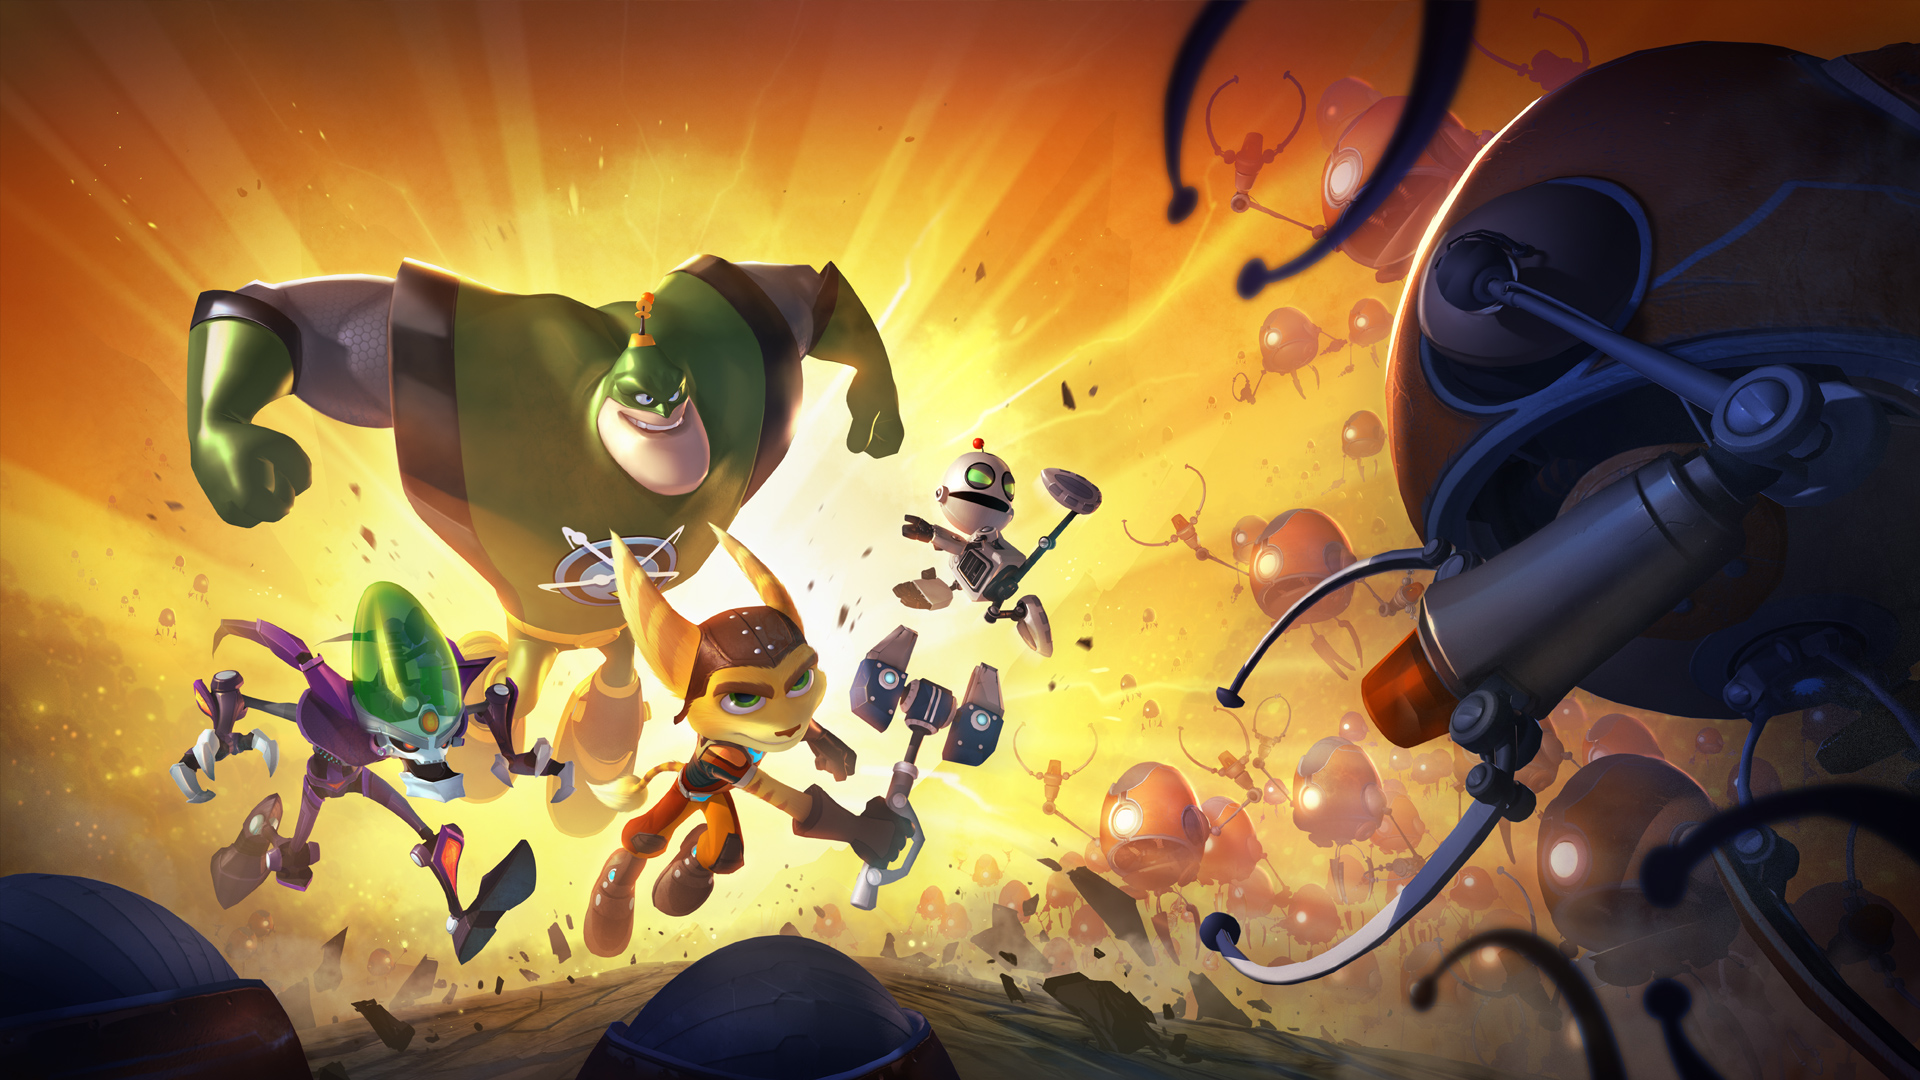 Video Game Ratchet & Clank: All For One HD Wallpaper | Background Image